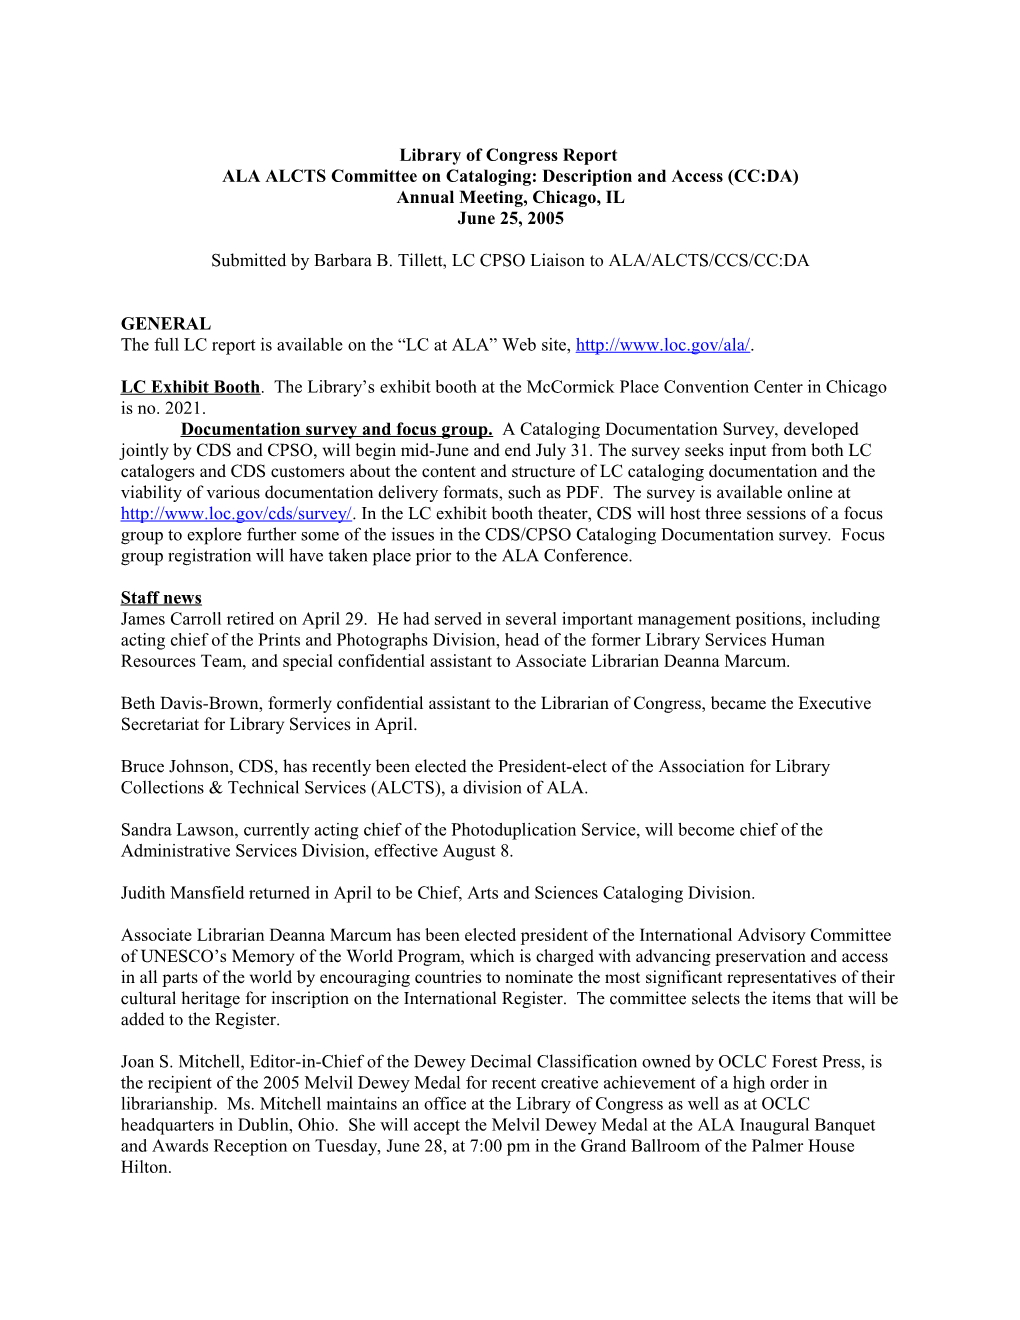 Library of Congress Report to ALA/ALCTS/Committee on Cataloging: Description and Access (CC:DA)